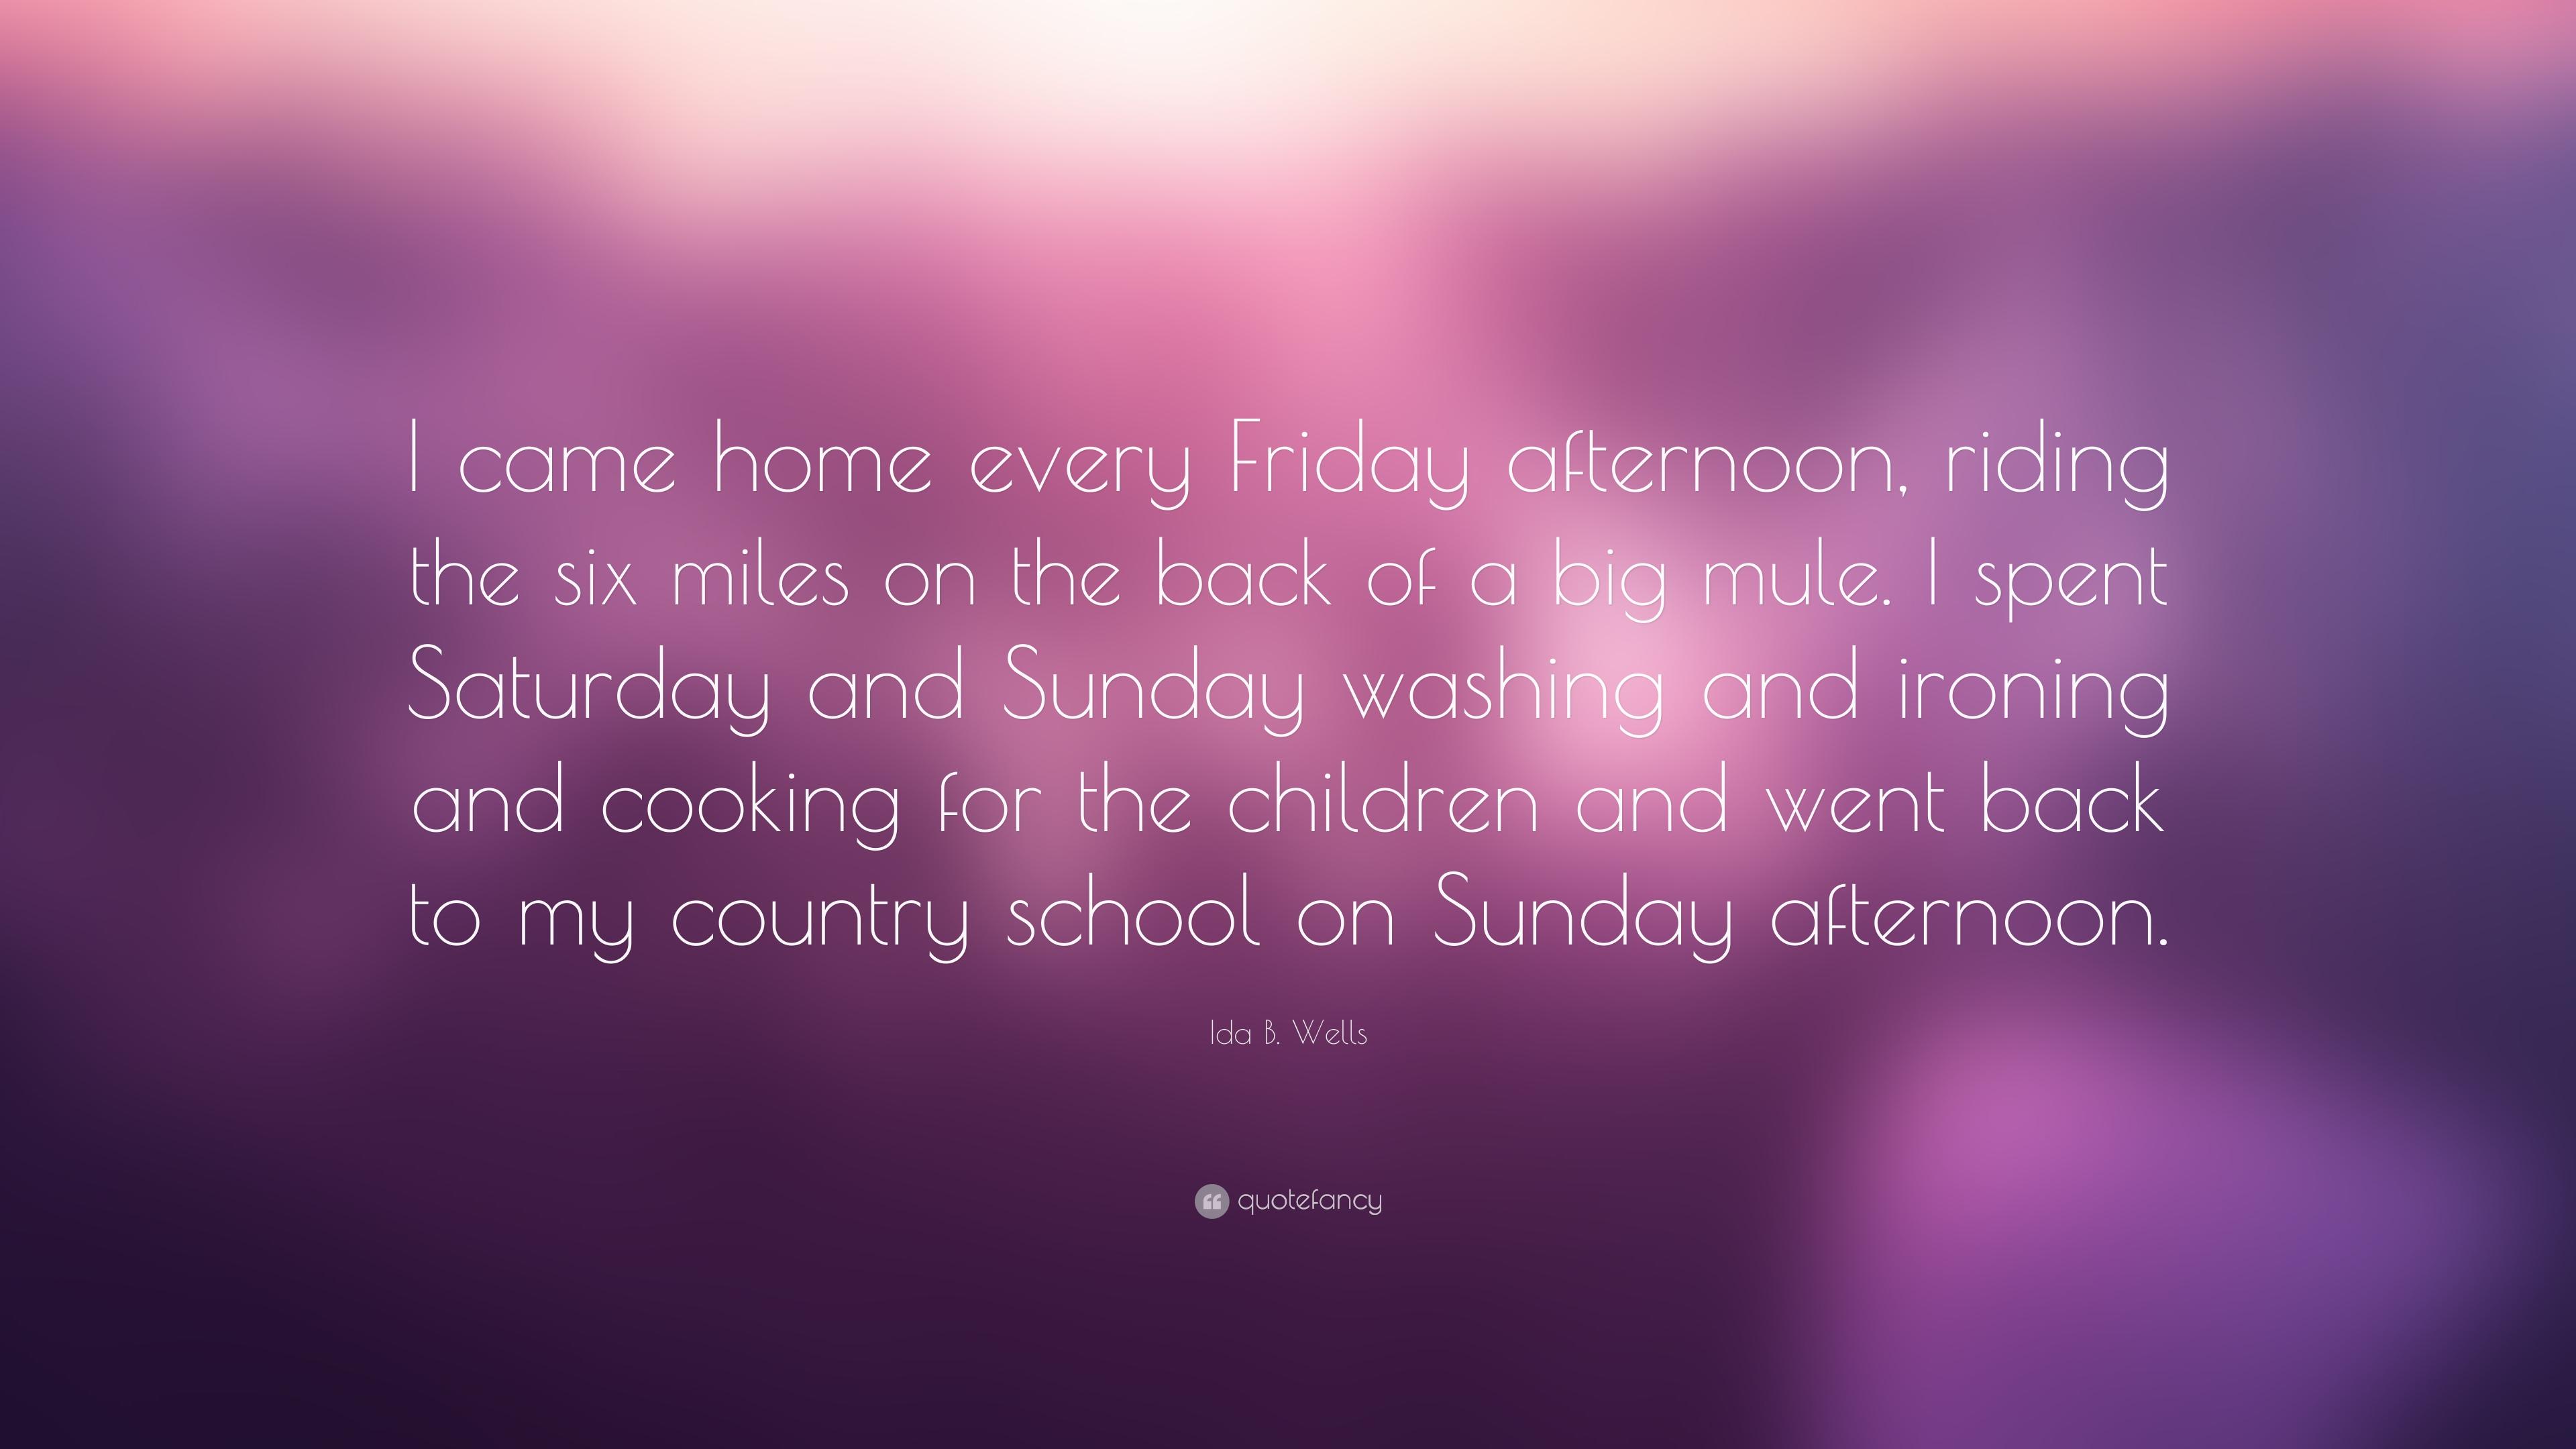 Ida B. Wells Quote: “I came home every Friday afternoon